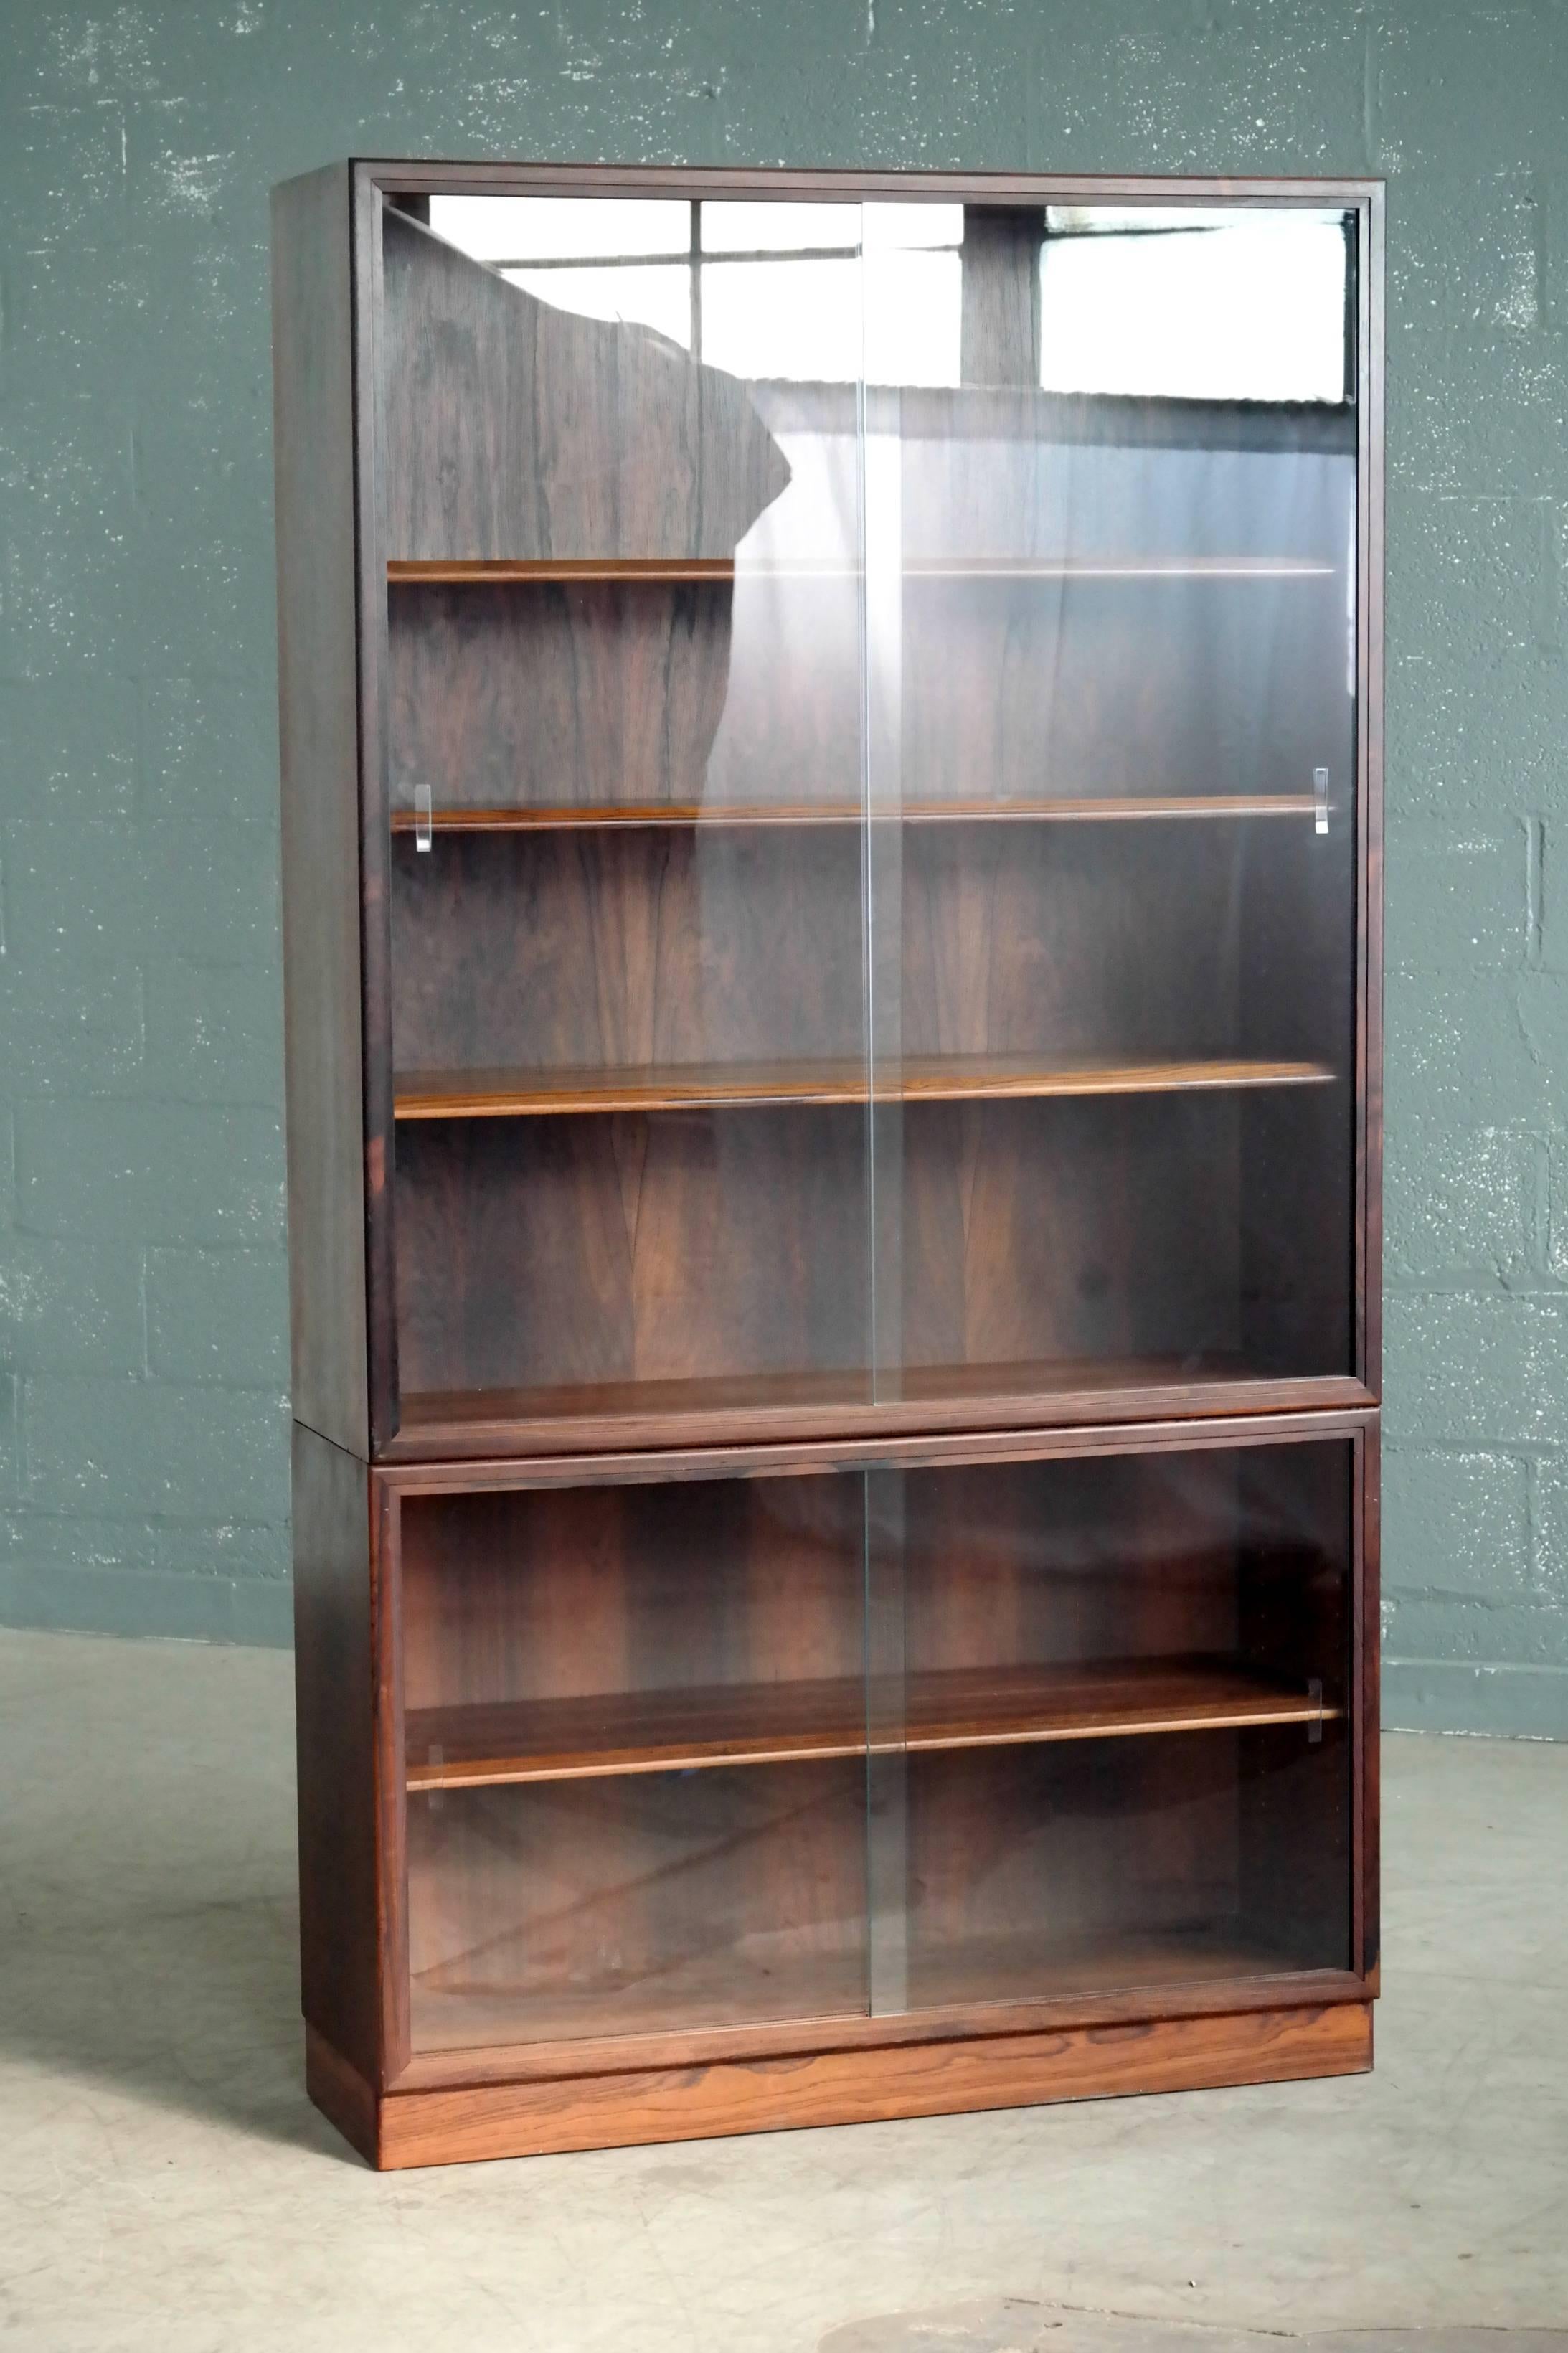 Beautiful 1960s rosewood bookcase or display cabinet attributed to Arne Vodder who often designed for John Stuart. The cabinets has Arne Vodder's signature finger joints and is overall very high quality. Made from Brazilian rosewood with very nice